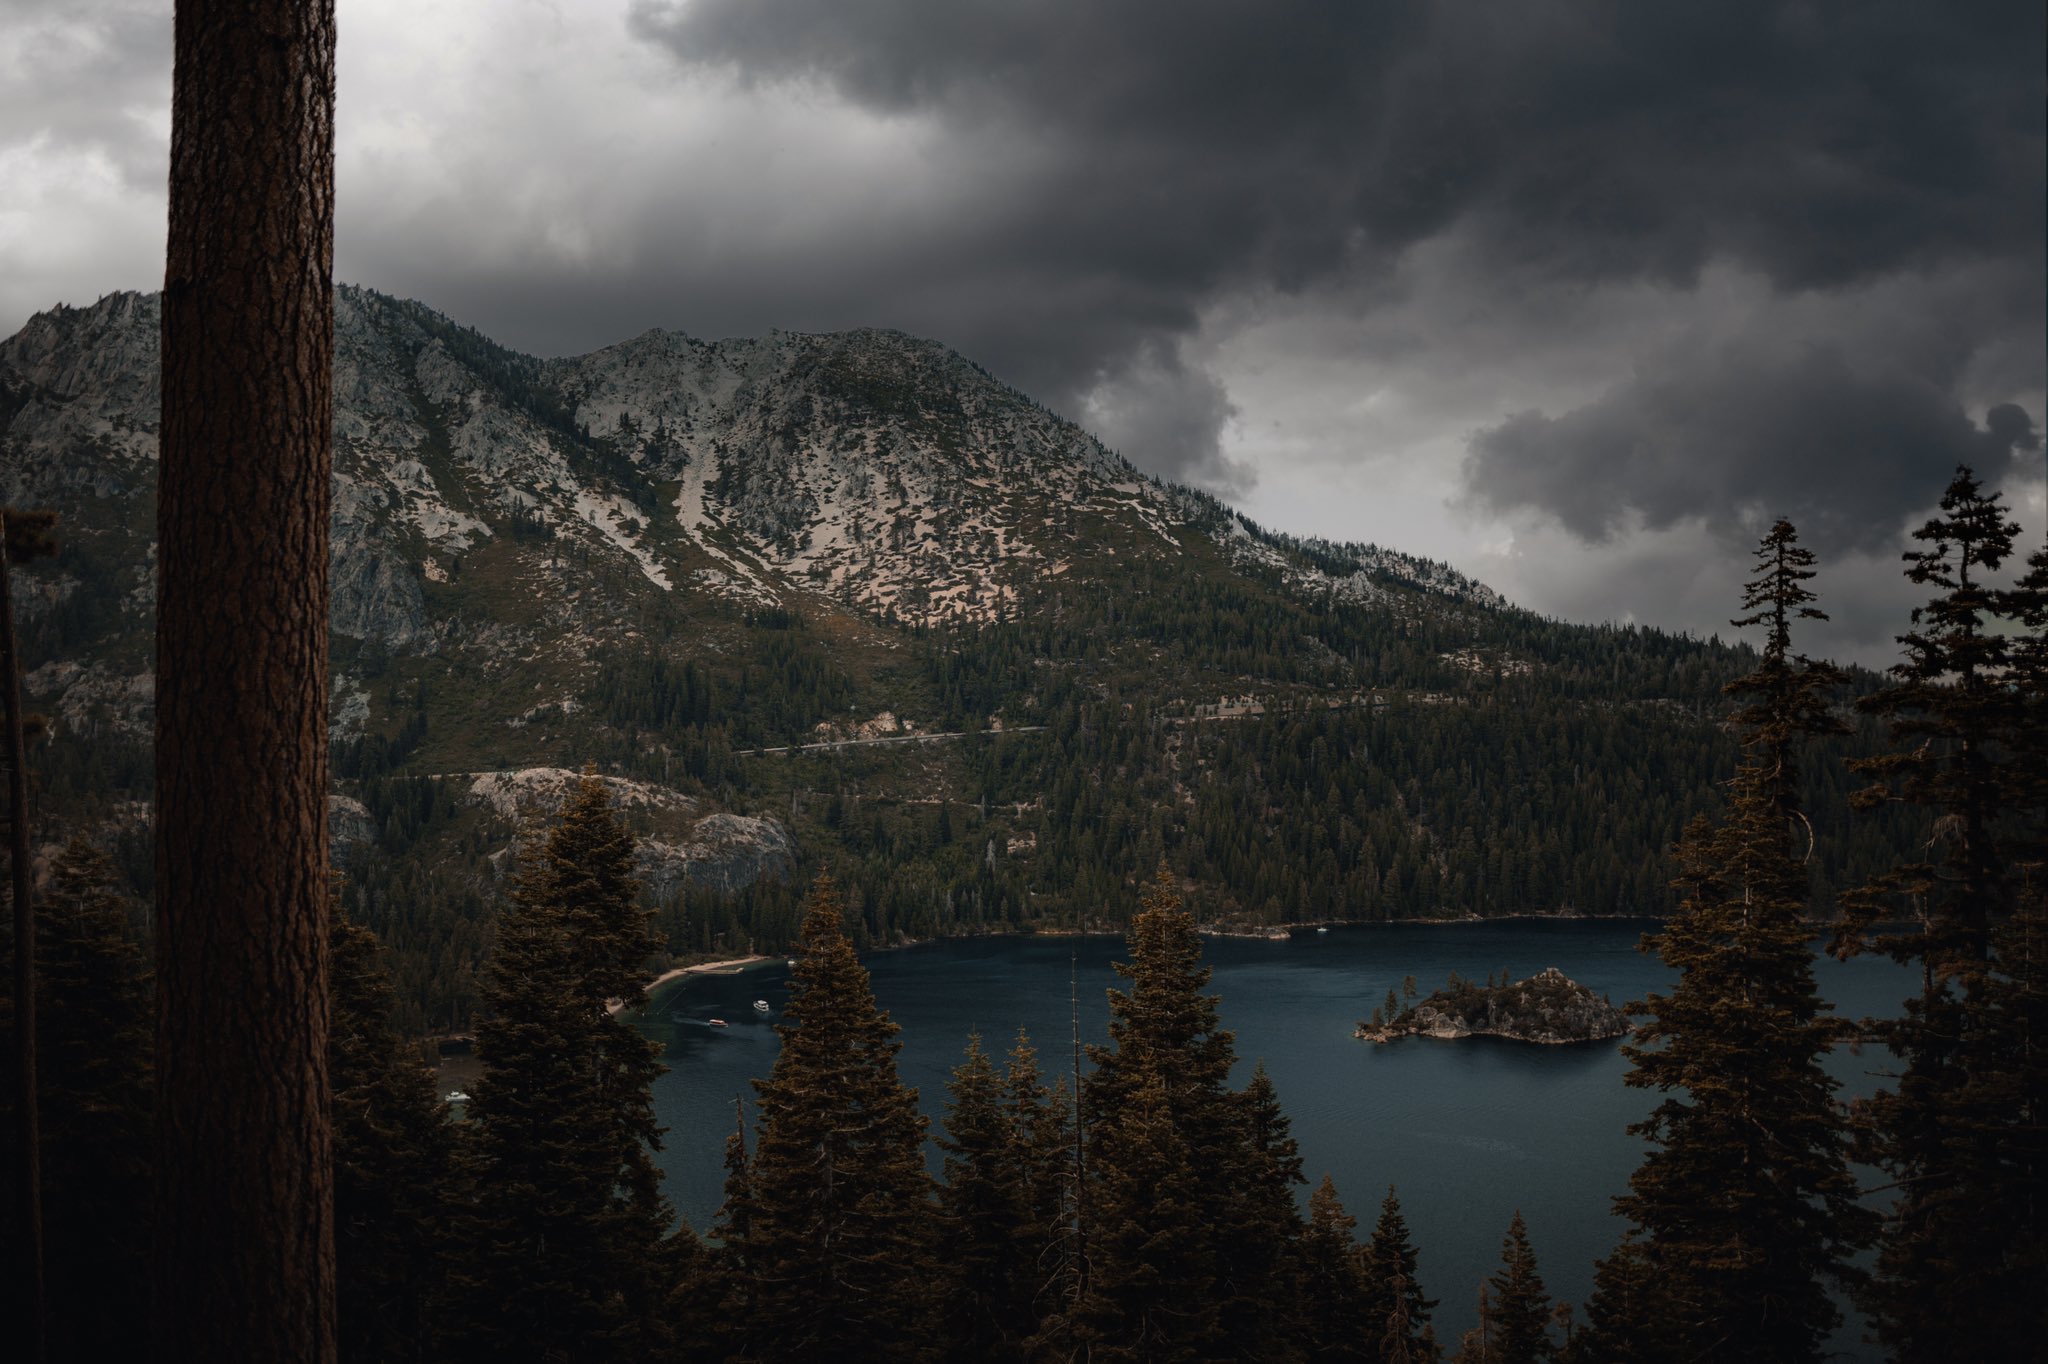 General 2048x1364 landscape mountains snowy mountain pine trees forest nature lake clouds overcast